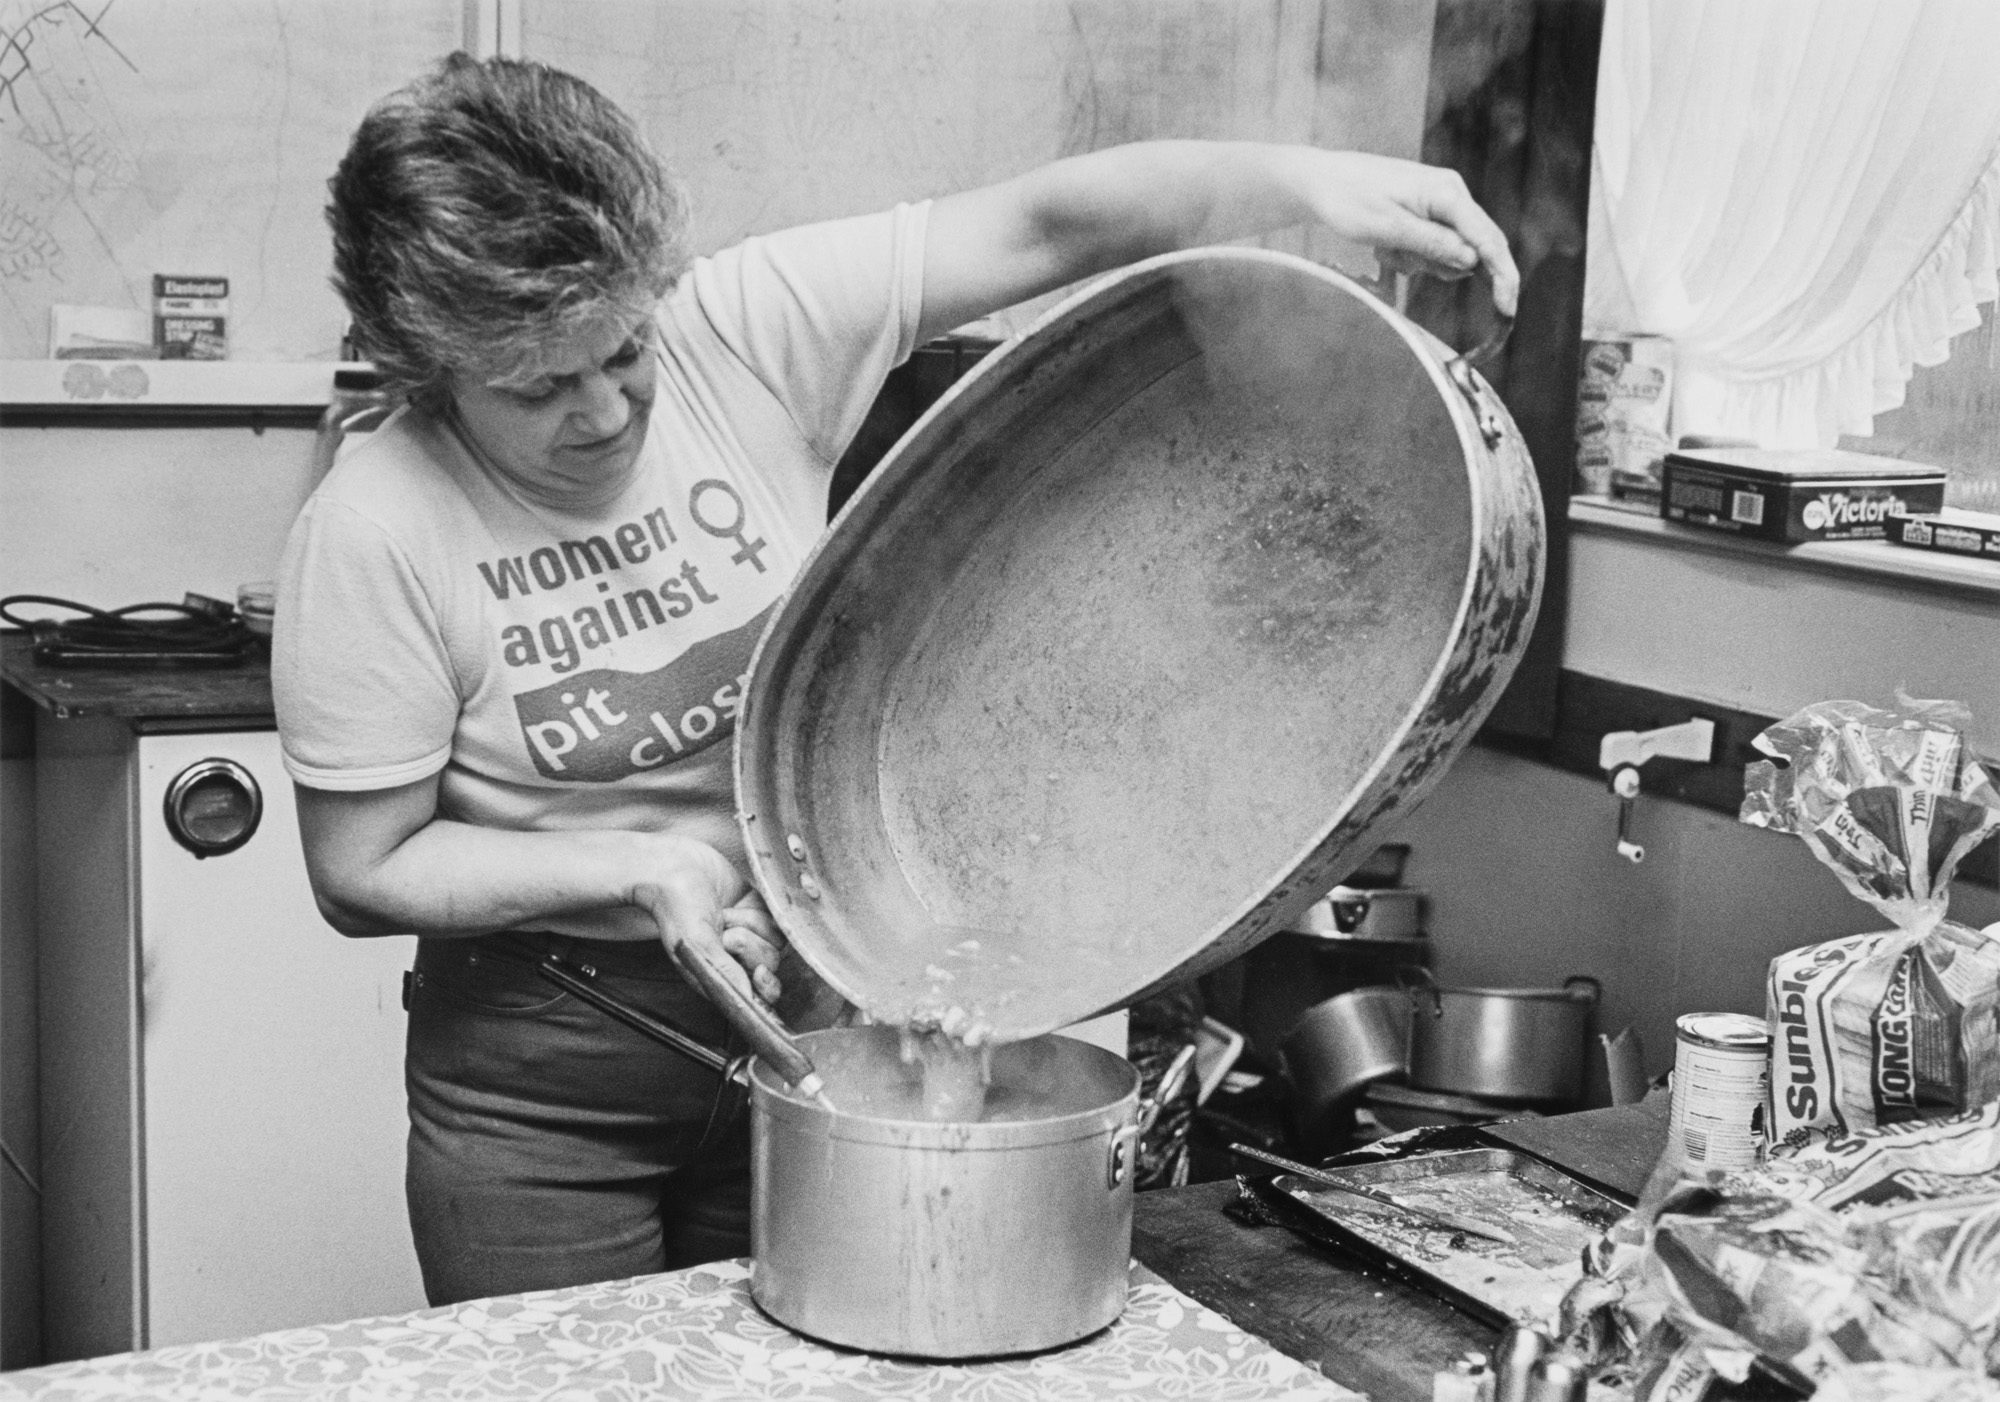 Black and white photograph of a woman pouring food from a very large metallic pot into a smaller pot, wearing jeans and a t-shirt that reads 'women against pit closures'